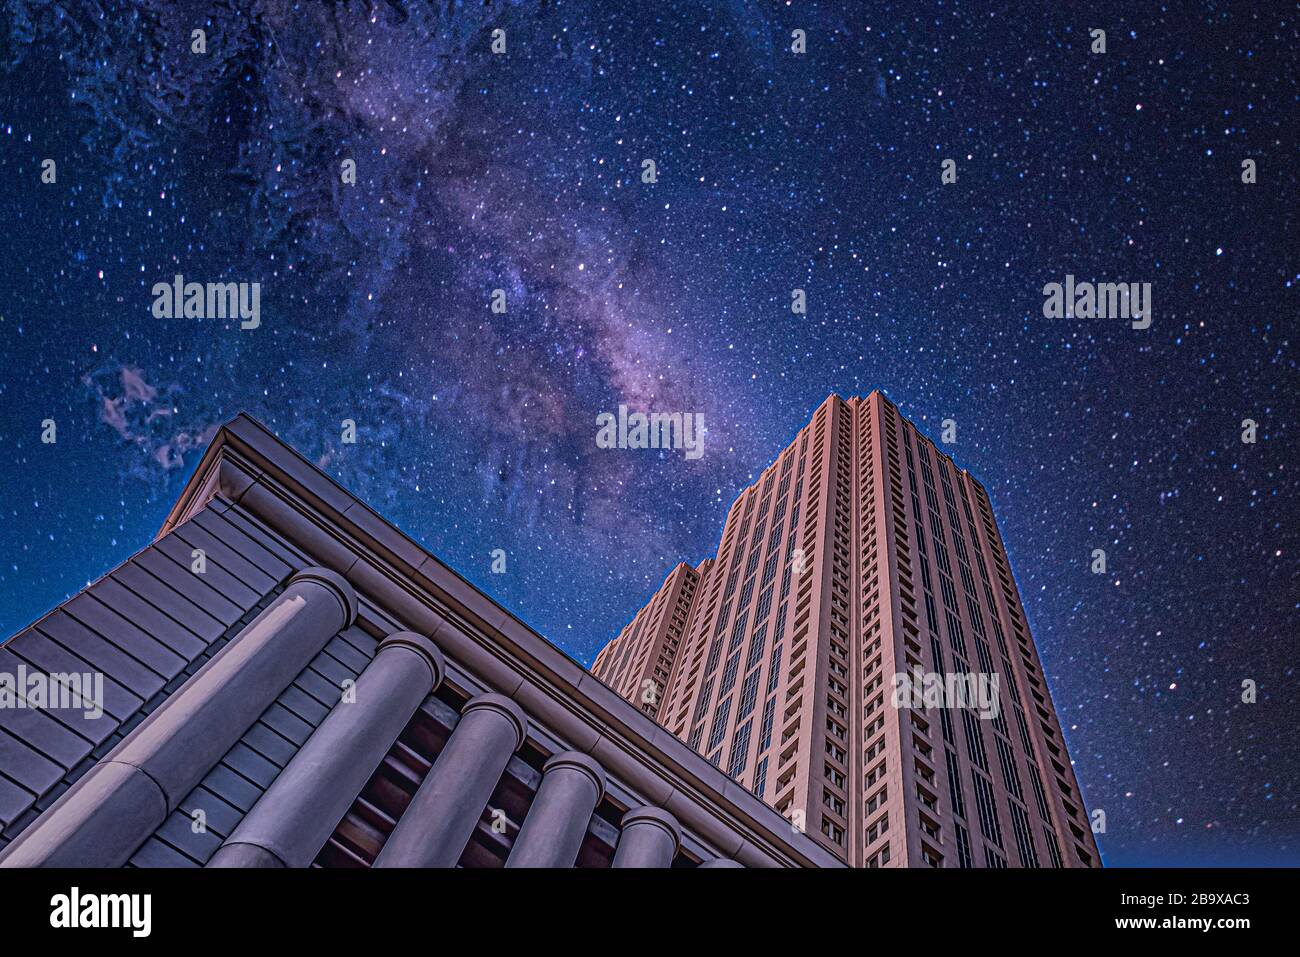 Low angle shot of tall buildings under a starry night sky Stock Photo